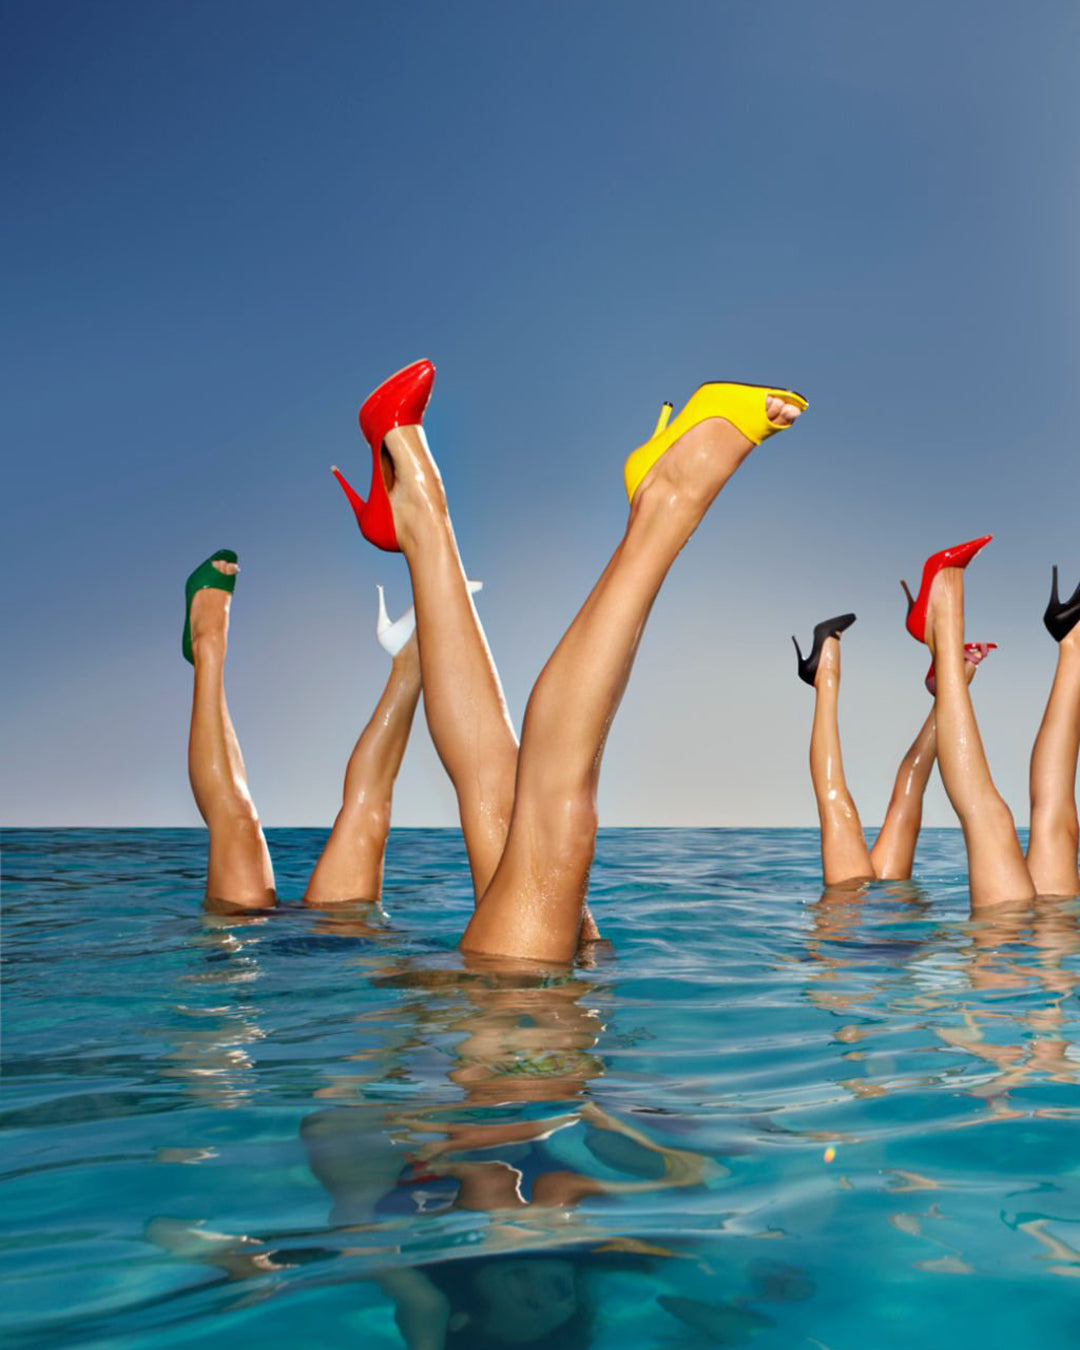 Baldy Art Gallery Group of Legs Protruding Out of Infinity Pool Photograph Print